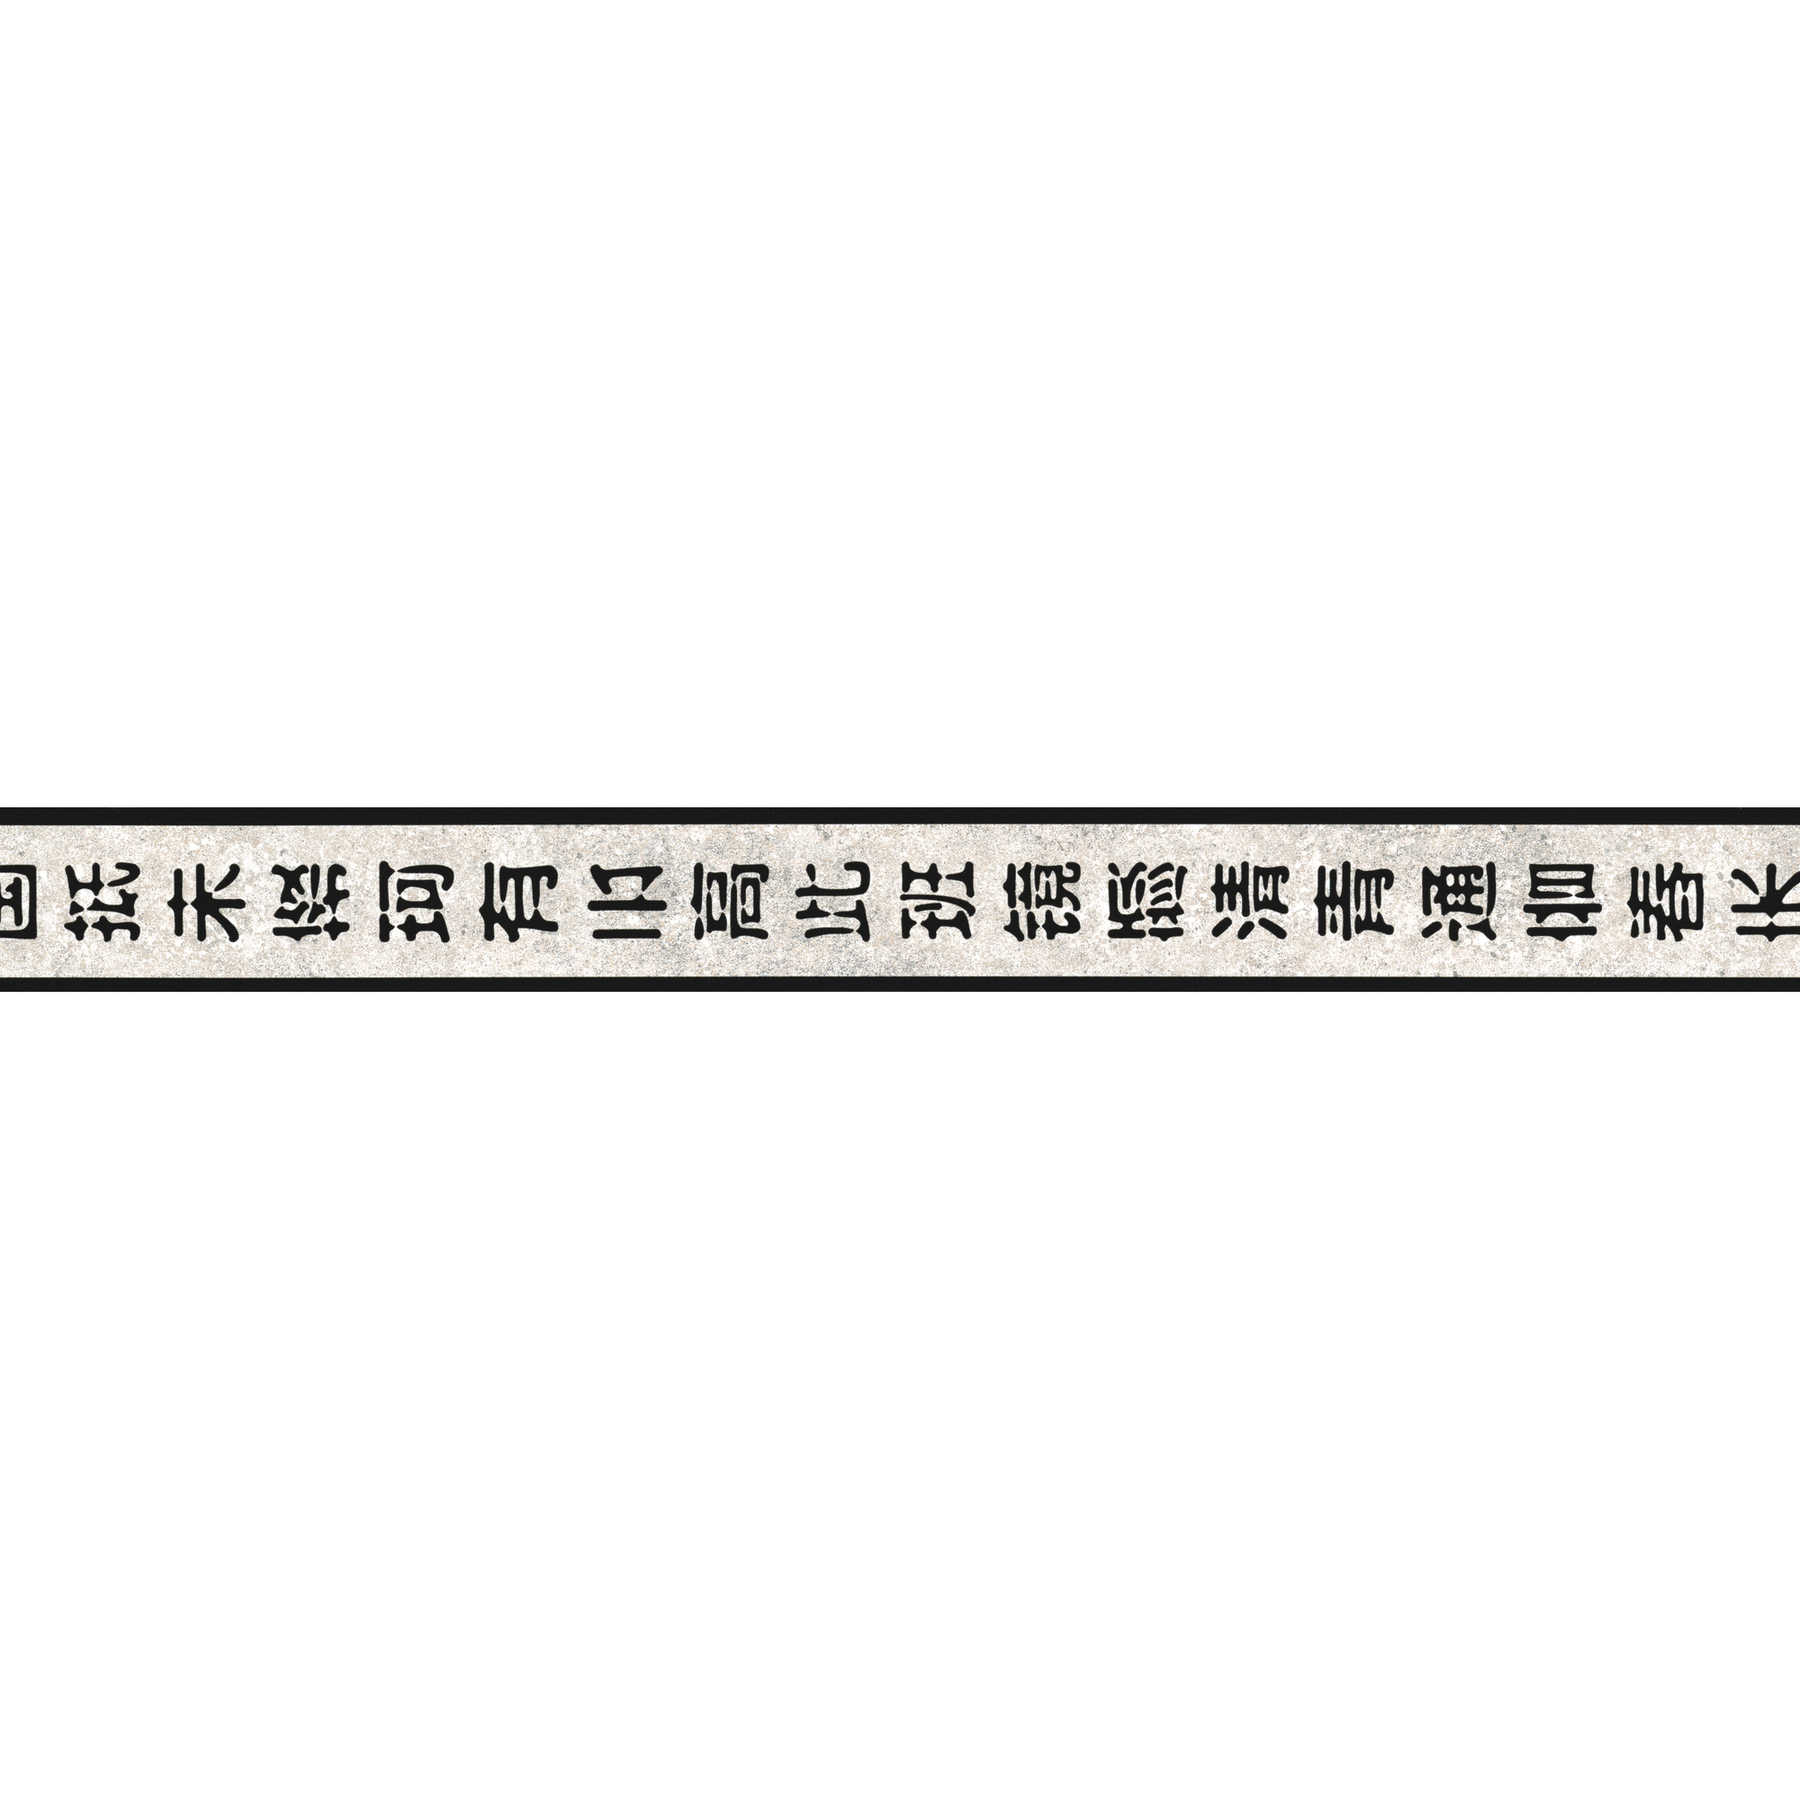         Black and white wallpaper border with Asian characters
    